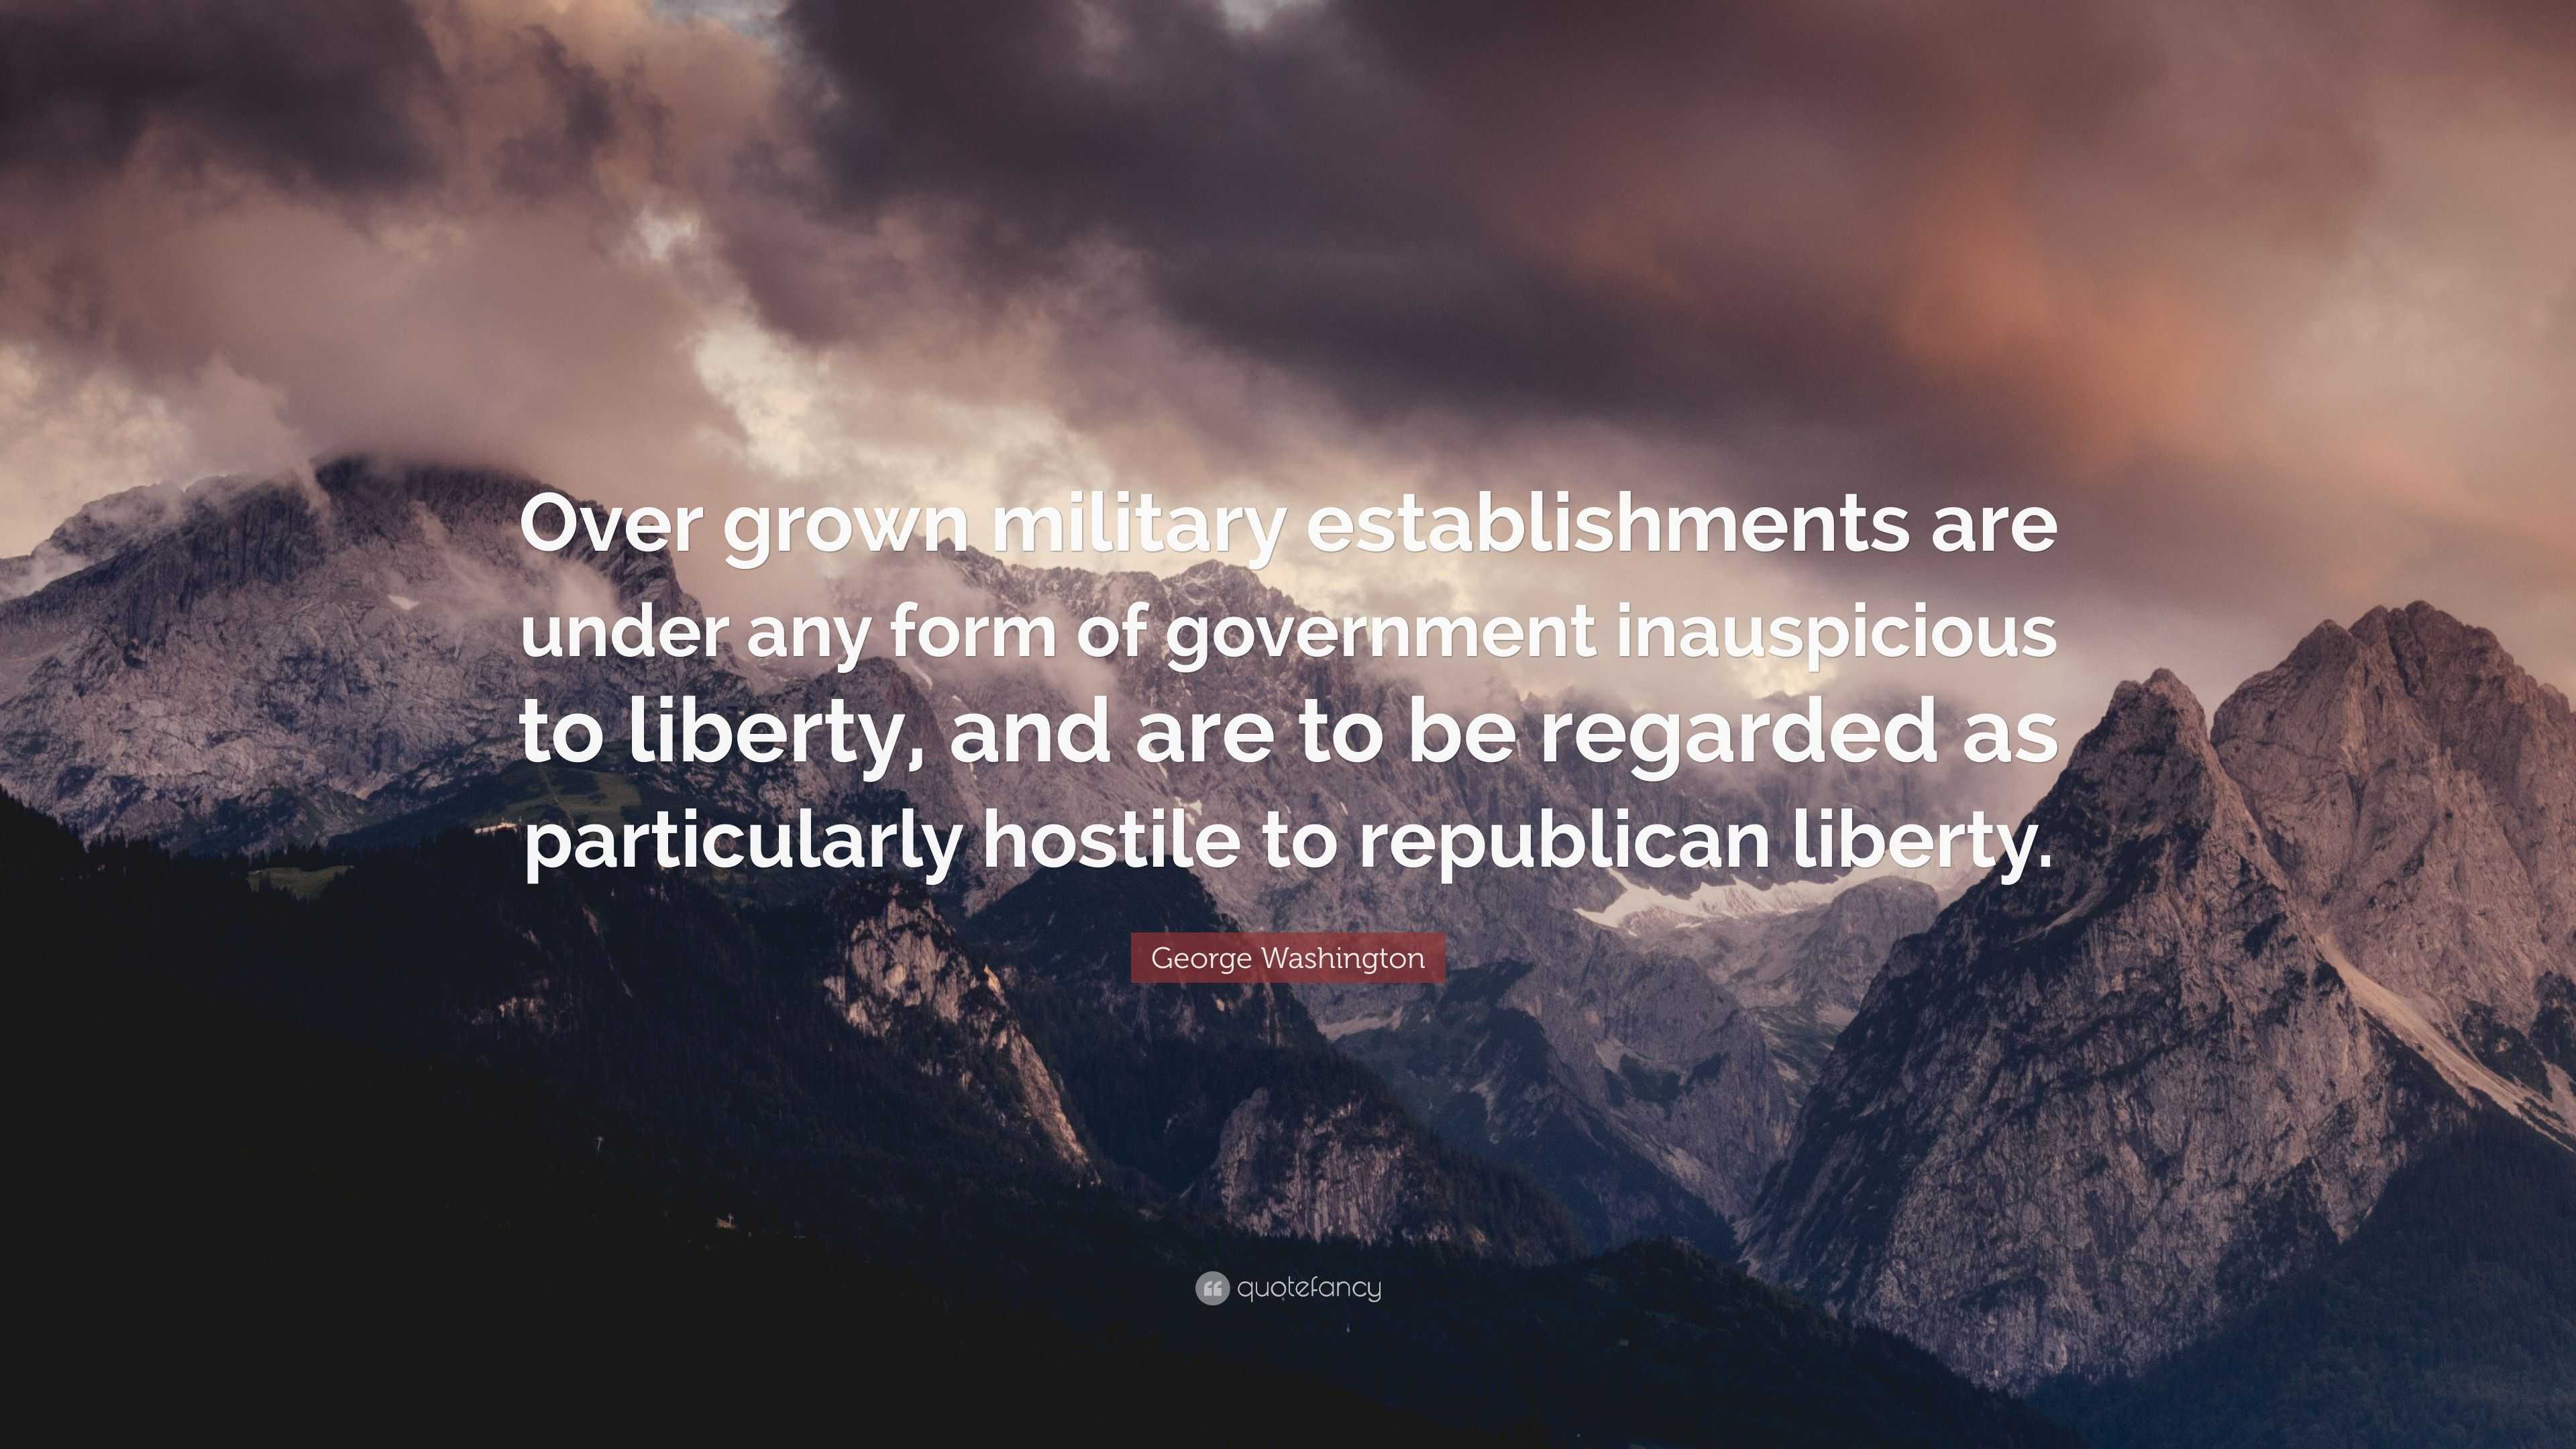 George Washington Quote: “Over grown military establishments are under ...